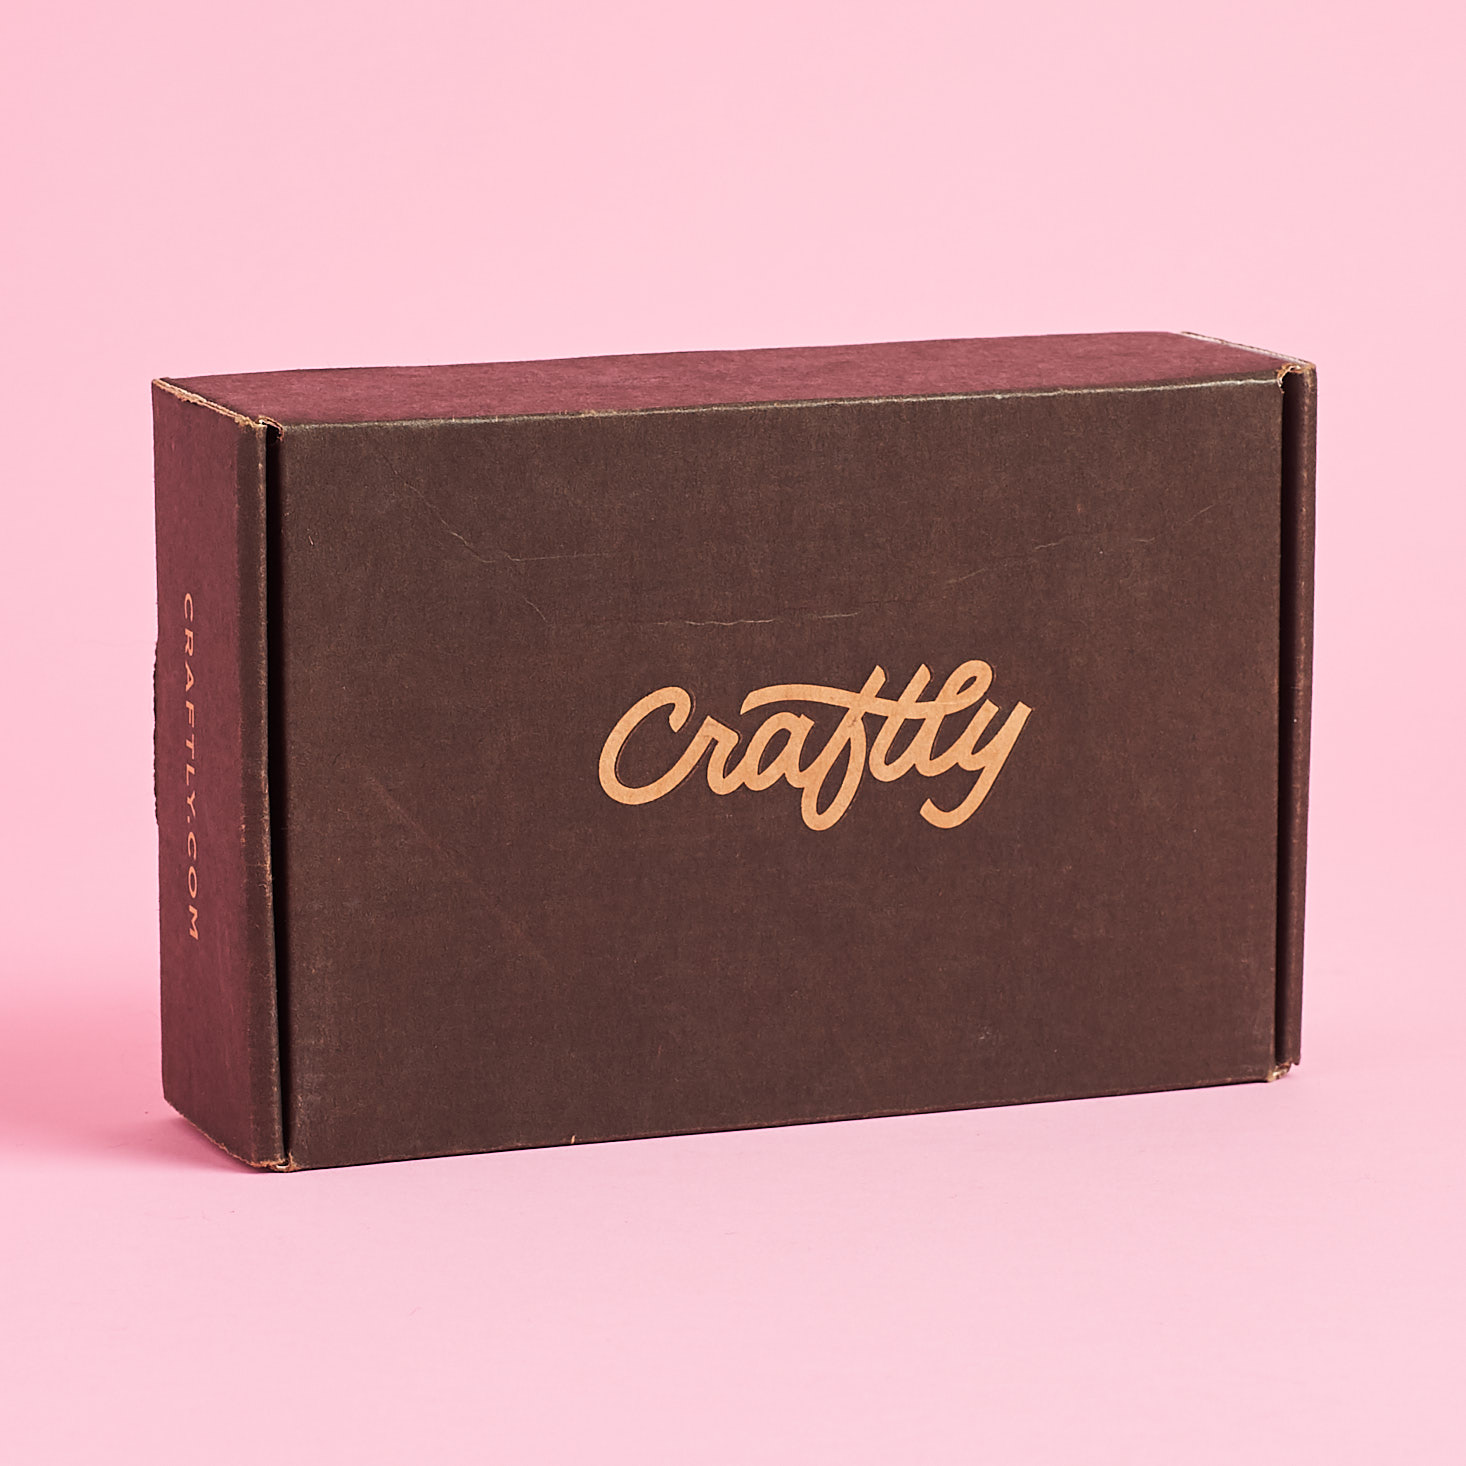 Craftly Women’s Subscription Box Review – October 2017